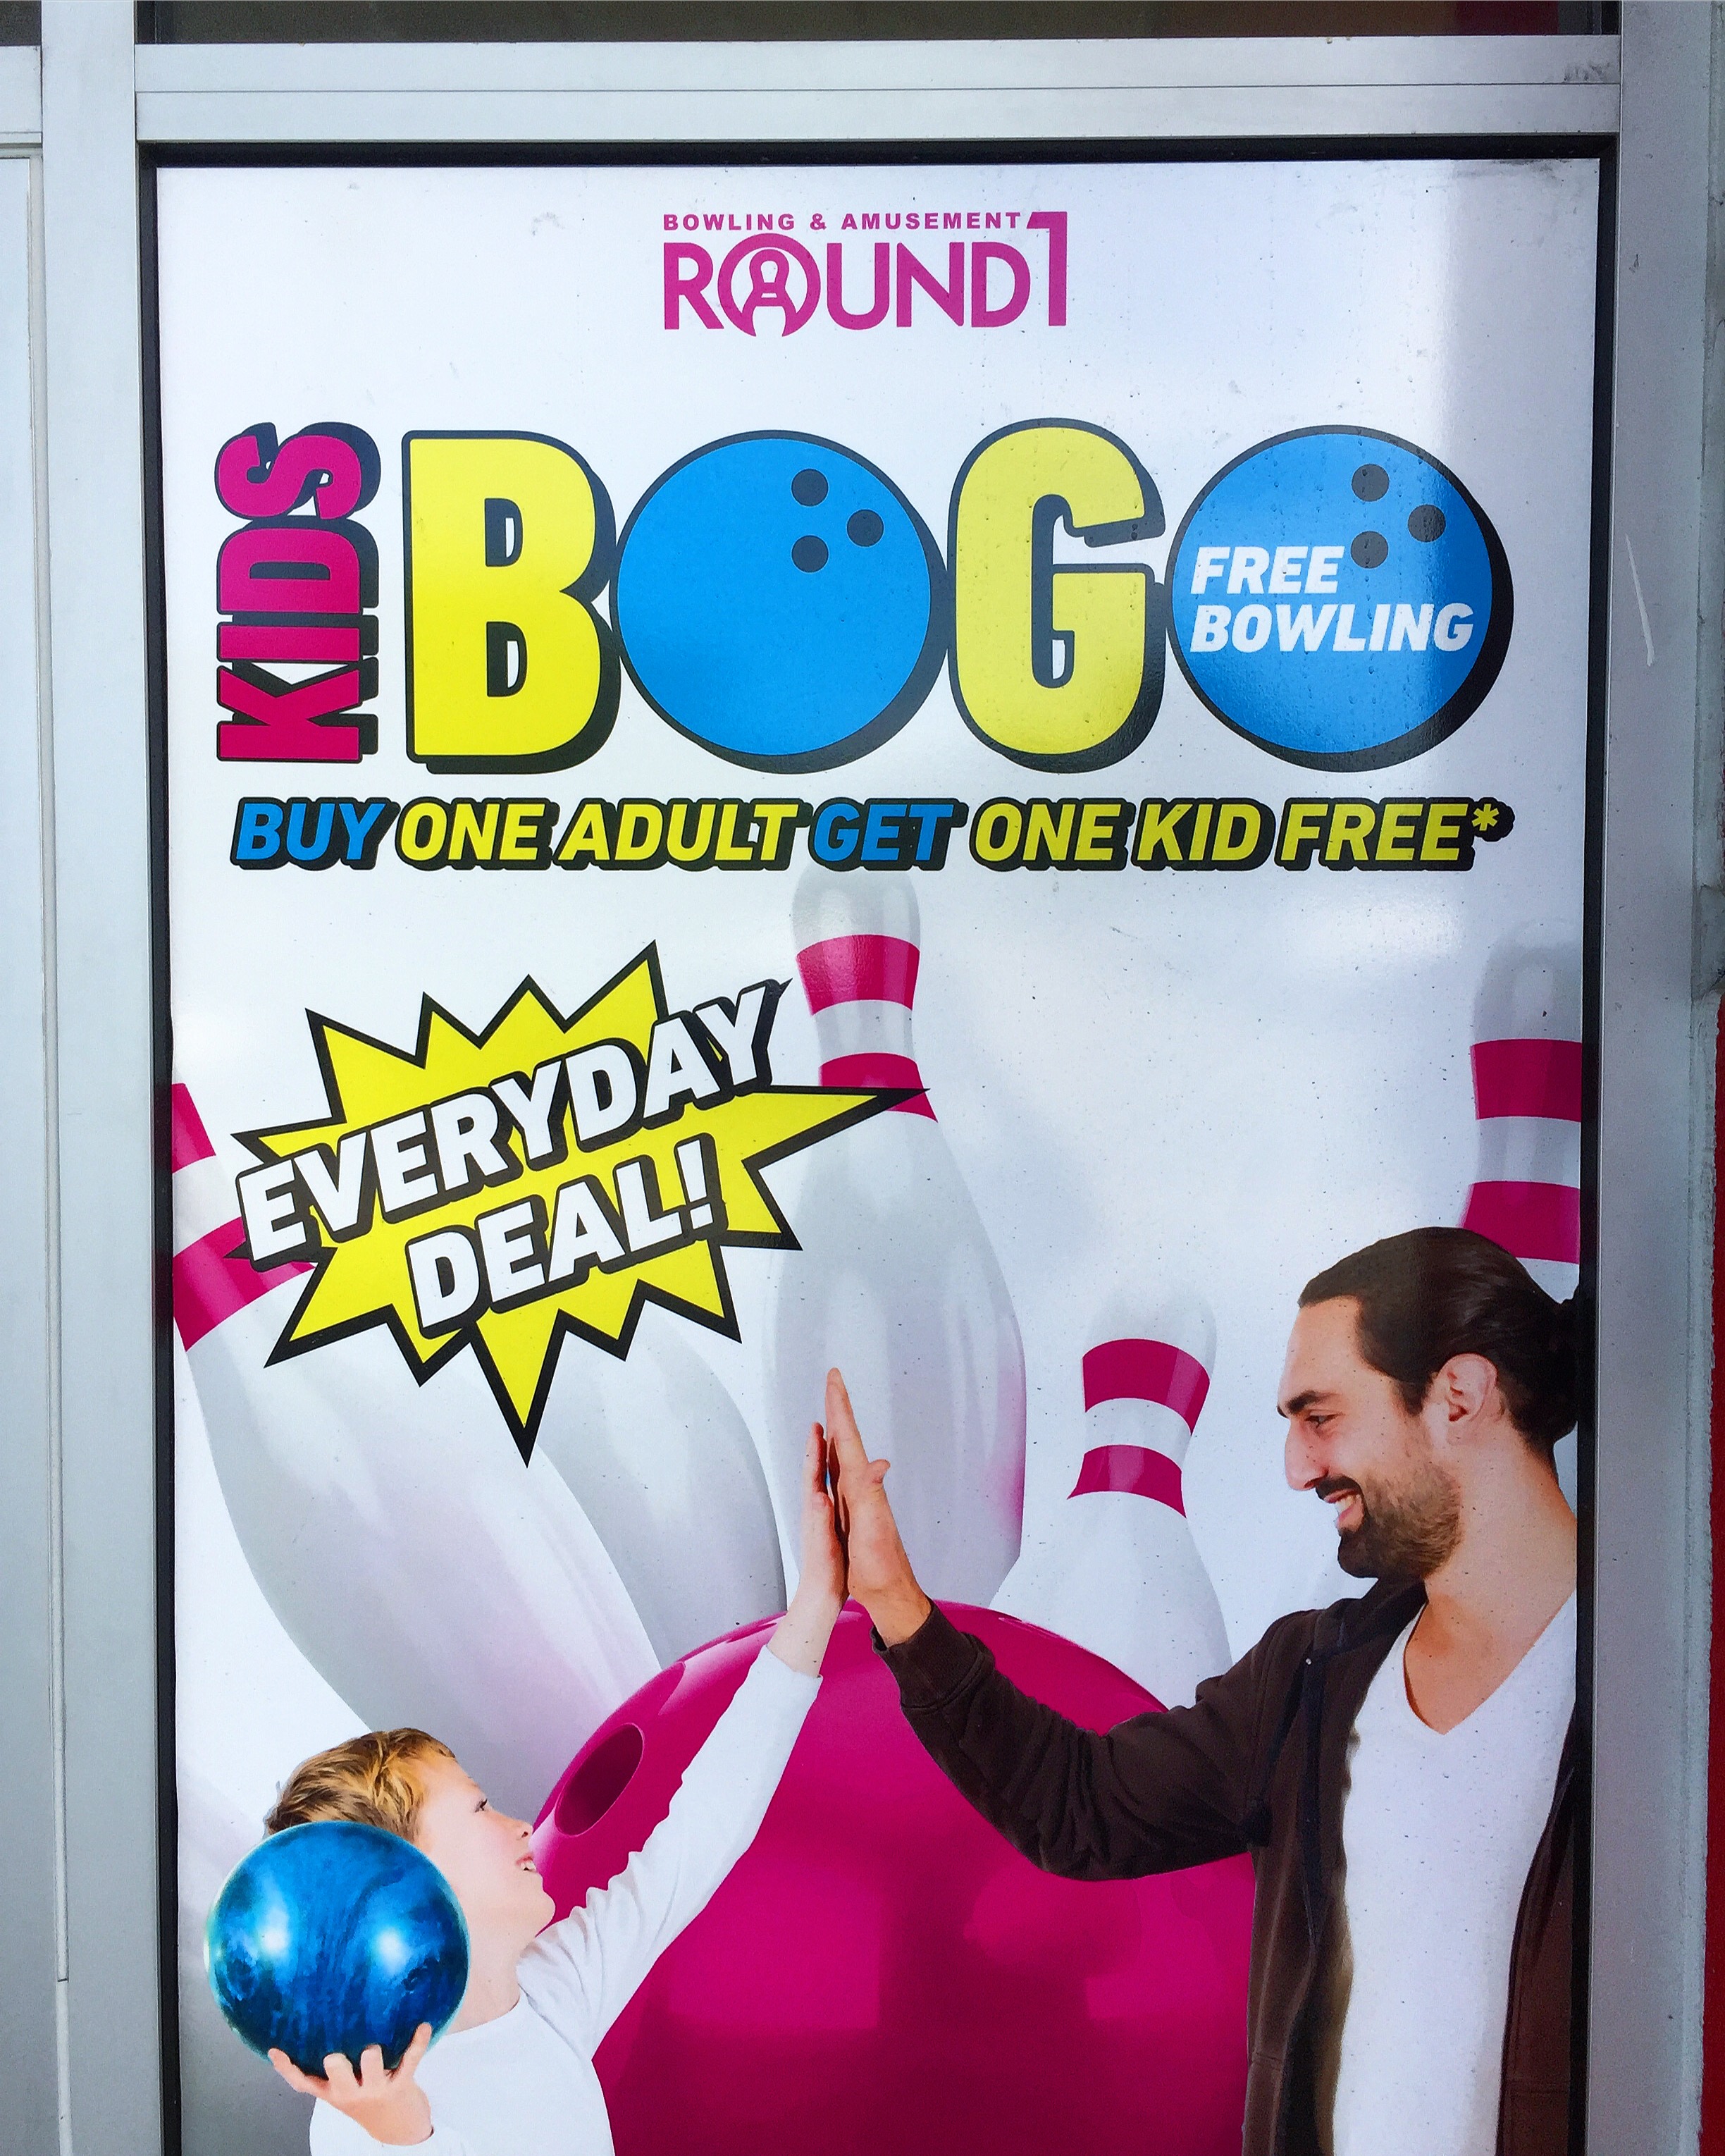 round 1 - Howling Serent Round Bog Free Bowling Buy One Adult Get One Kid Free Everyday 2 Deal!